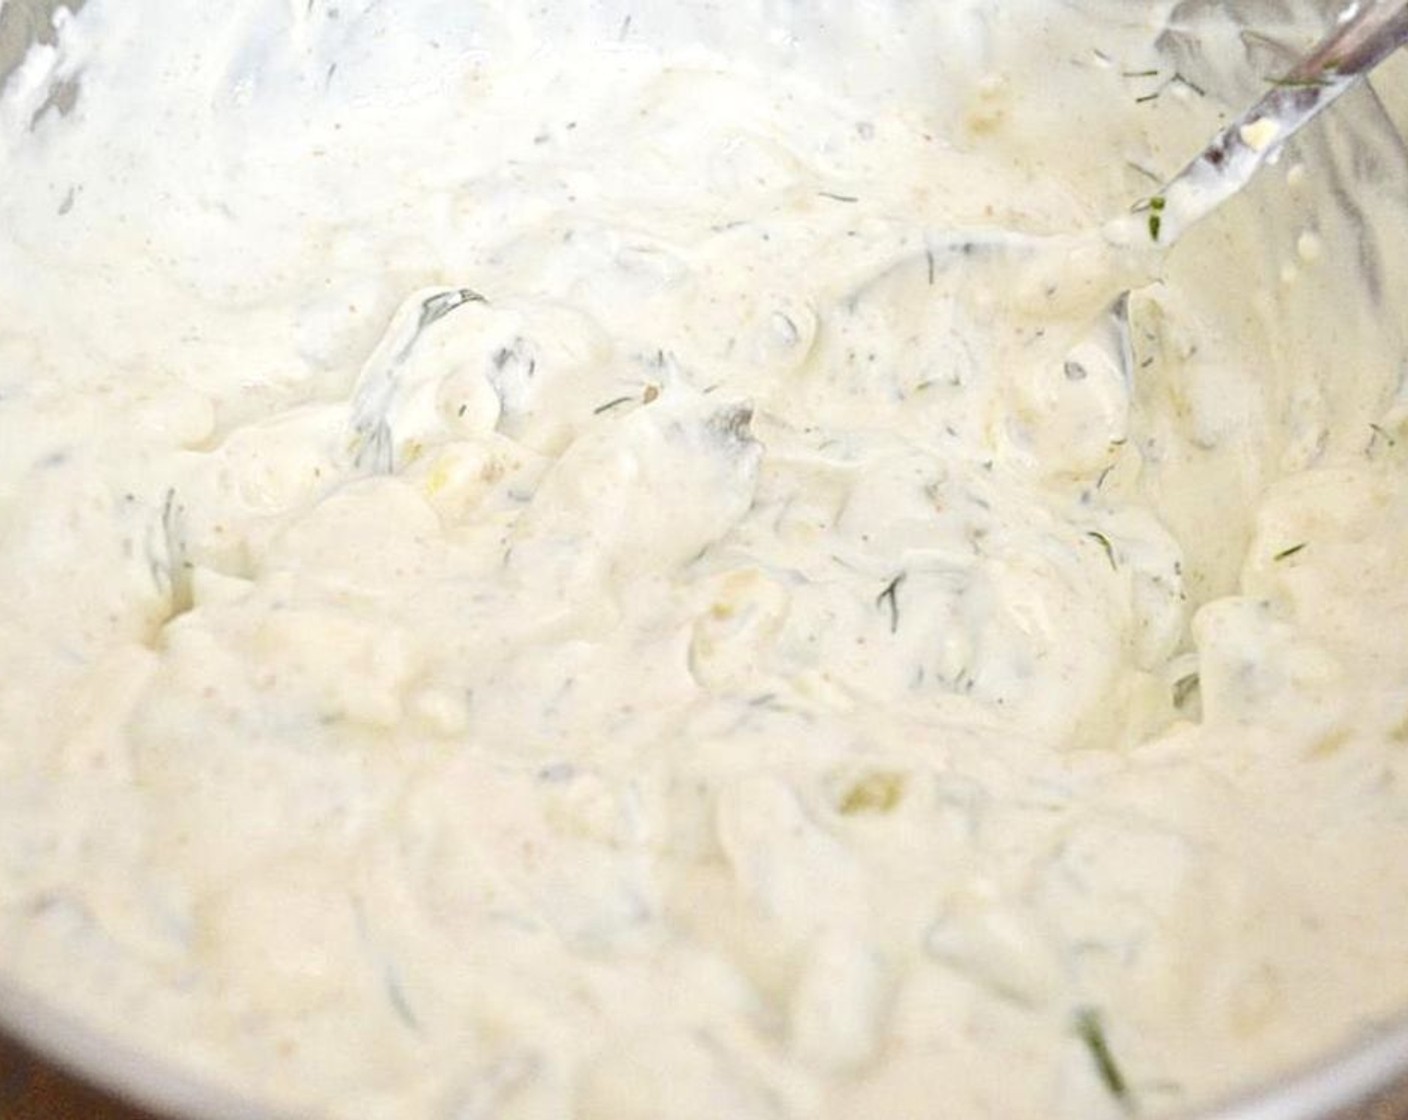 step 1 Simply combine Plain Greek Yogurt (1 2/3 cups), Cream Cheese (1/2 cup), Dill Pickle (1 cup), Fresh Dill (1/4 cup), Pickle Juice (1 Tbsp), McCormick® Garlic Powder (1 tsp), Dried Onions (1 tsp), Ground Cumin (1/2 tsp), Salt (1 pinch), and Ground Black Pepper (1 pinch) in a bowl and stir it together well.